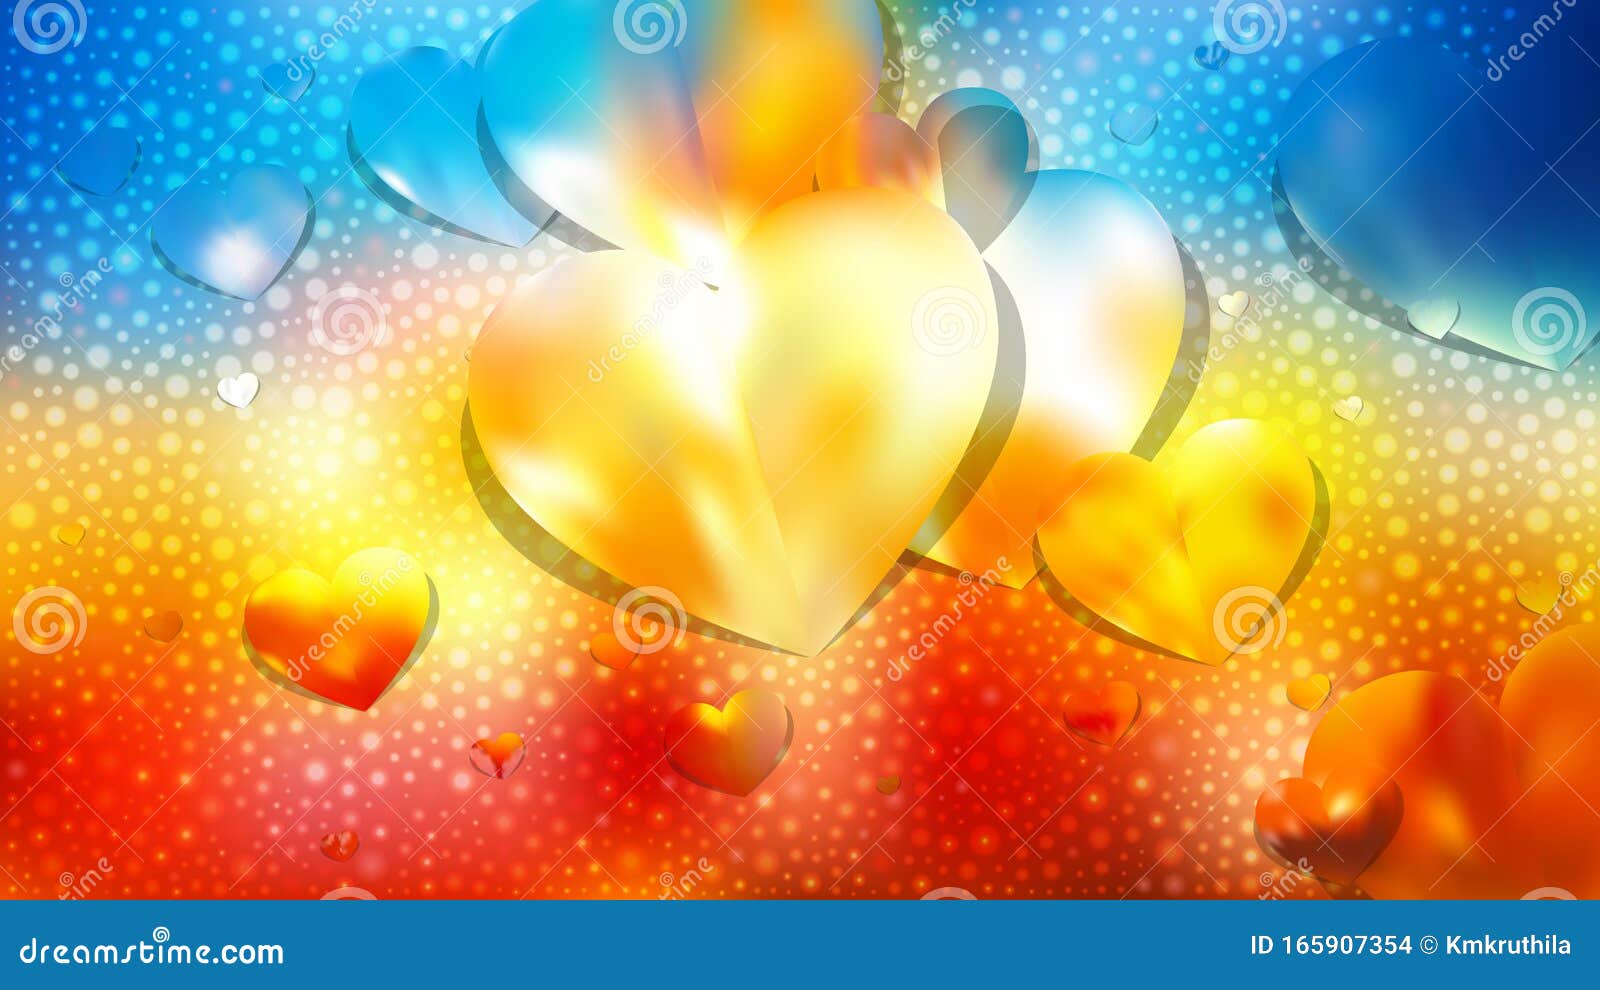 Red and Blue Love Background Image Stock Vector - Illustration of orange,  lovely: 165907354